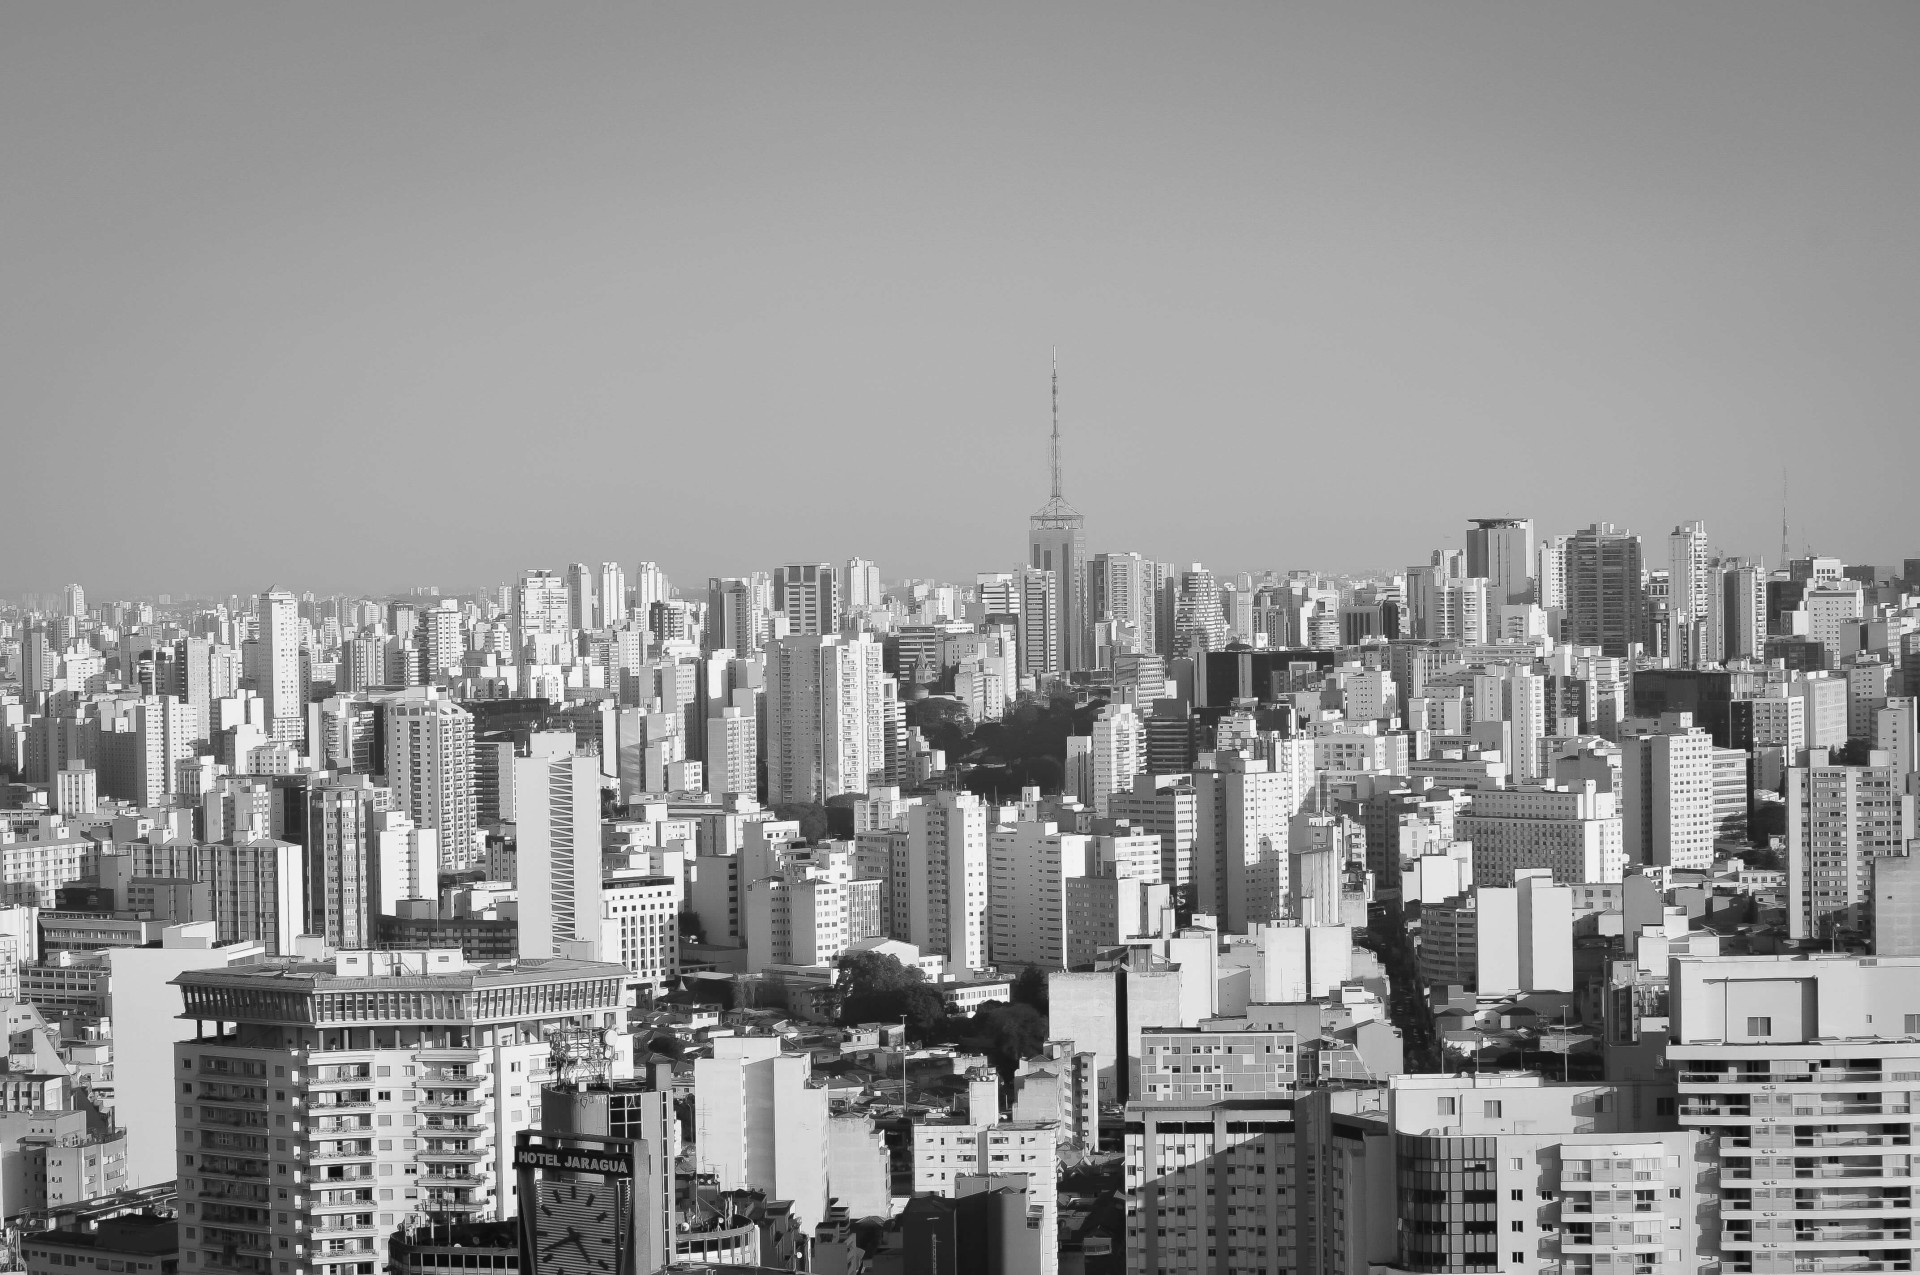 14 neighbors in Sao Paulo want to know and live there forever (Image: Unsplash)